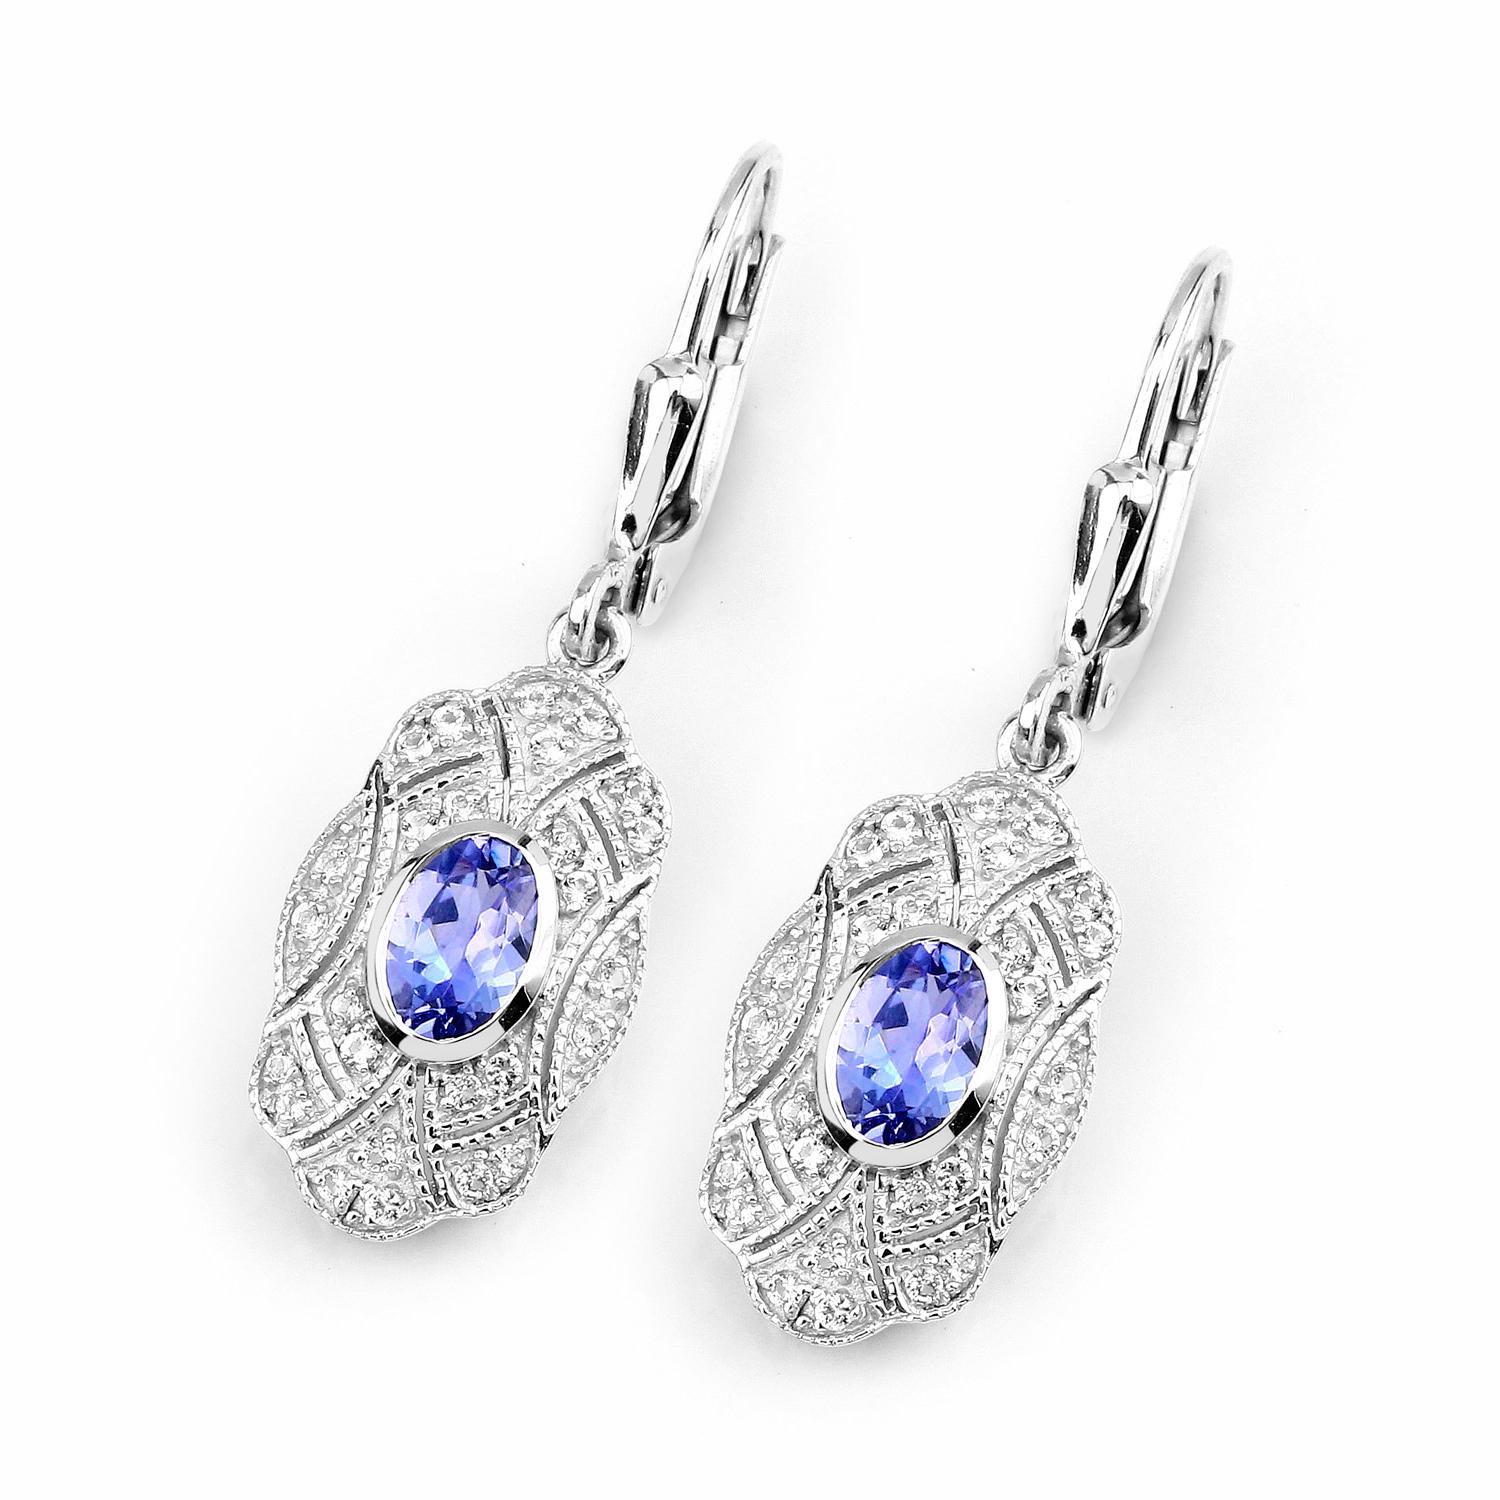 Oval Cut Tanzanite Dangle Earrings With White Topaz 1.16 Carats For Sale